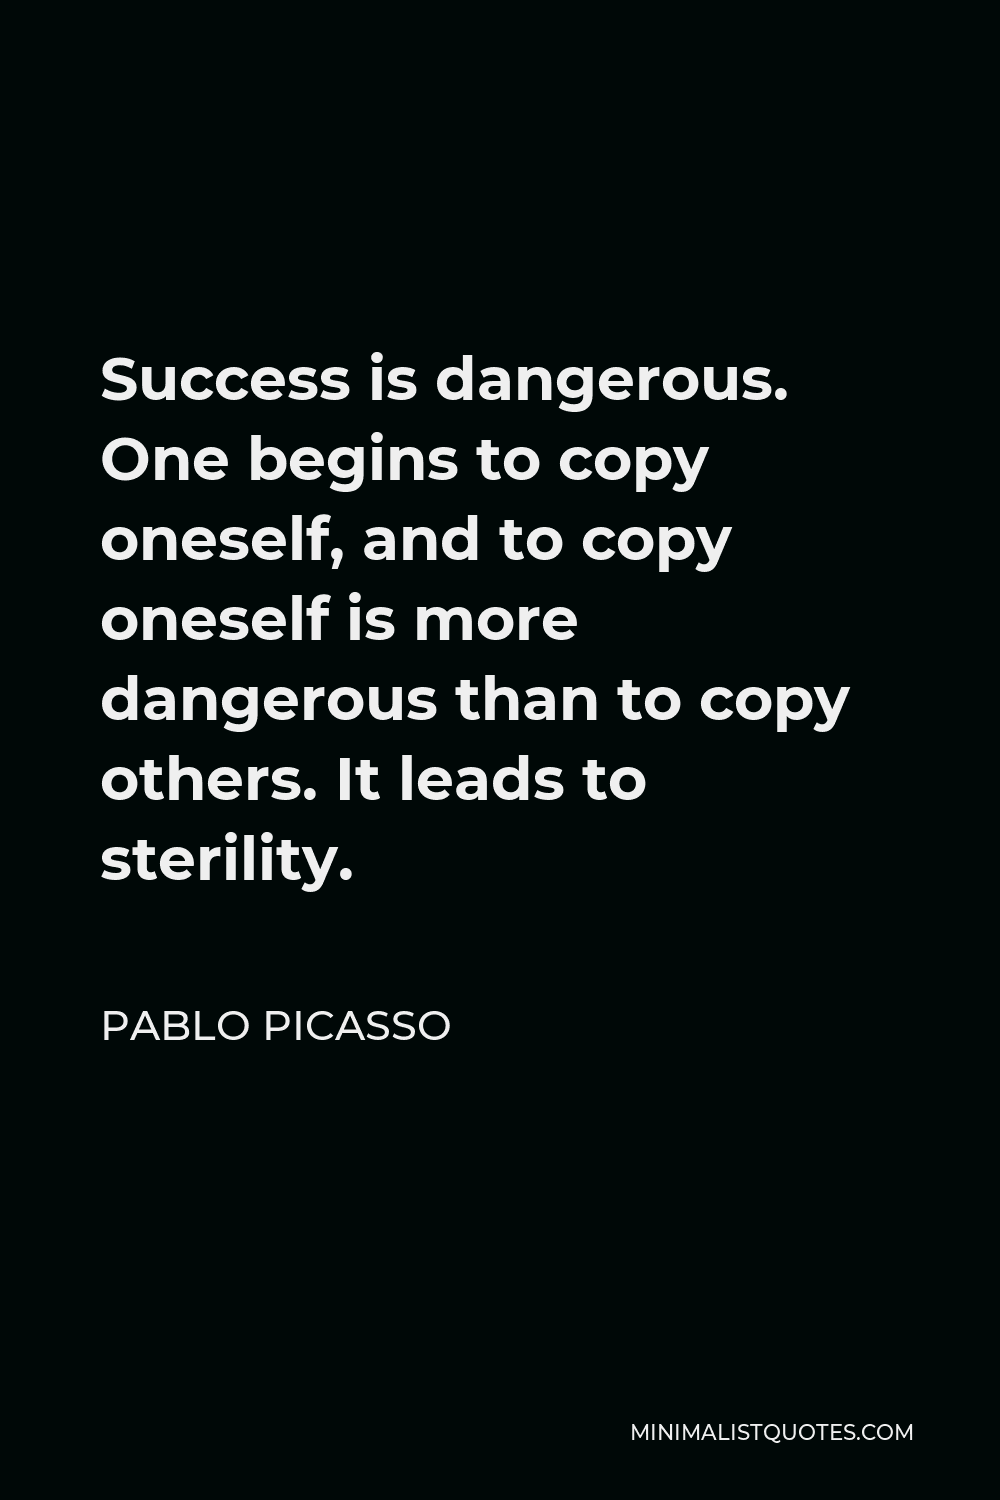 Pablo Picasso Quote - Success is dangerous. One begins to copy oneself, and to copy oneself is more dangerous than to copy others. It leads to sterility.